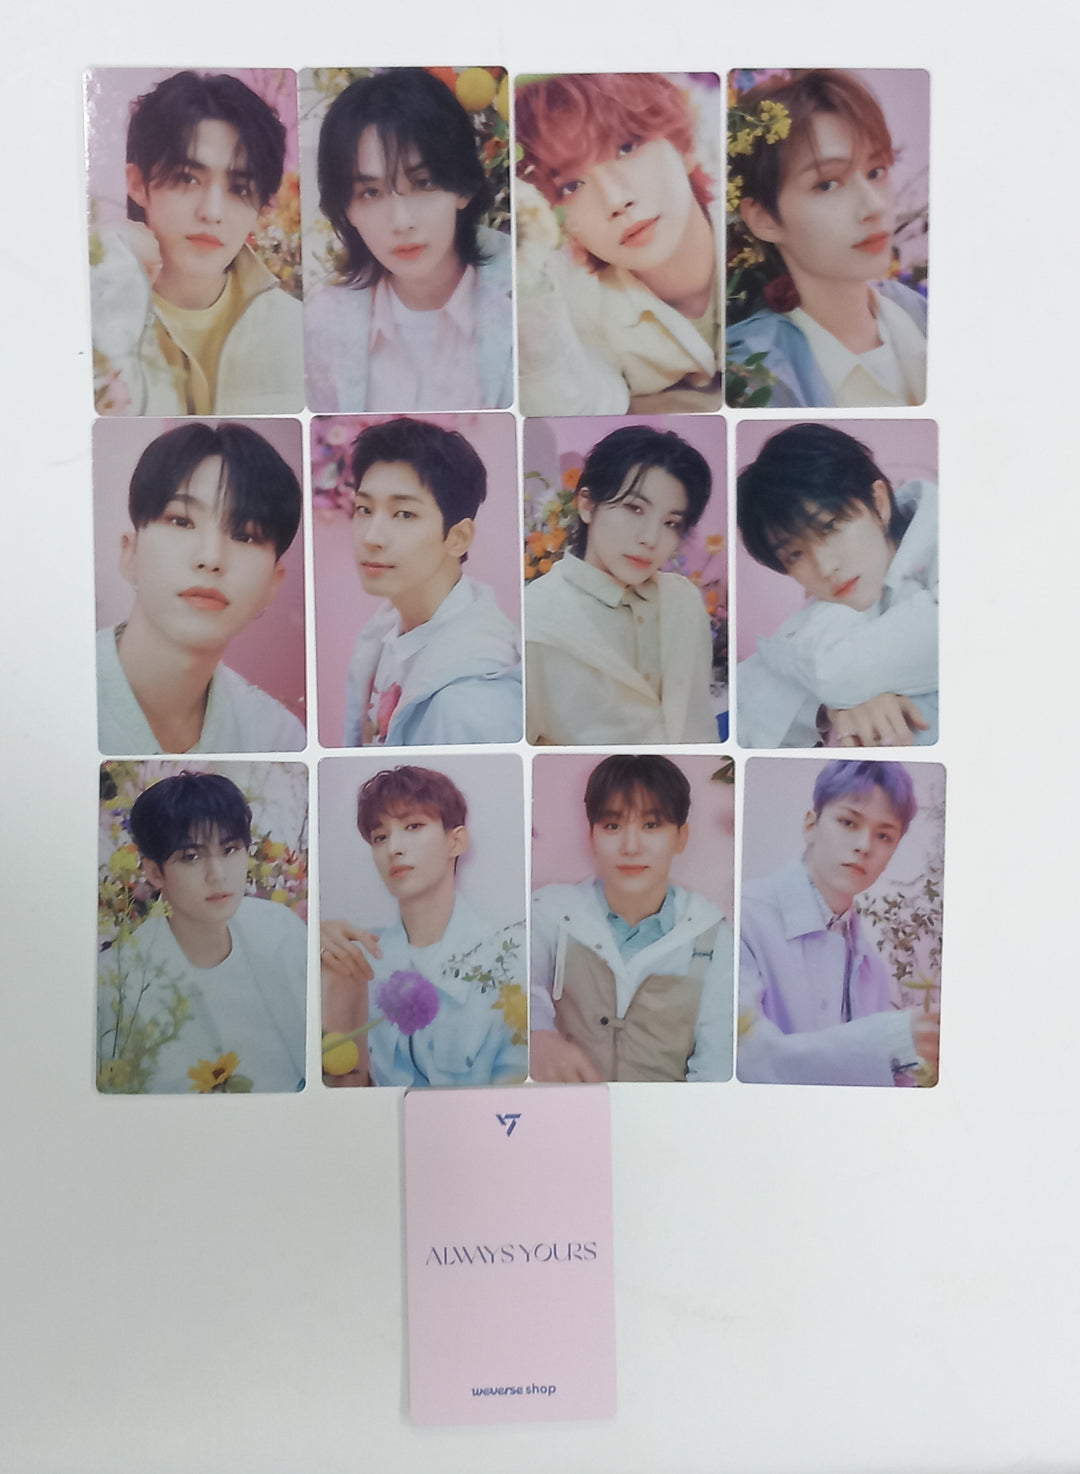 SEVENTEEN "ALWAYS YOURS" JAPAN - Weverse Shop Pre-Order Benefit Photocard, Photo Stand [23.08.24]